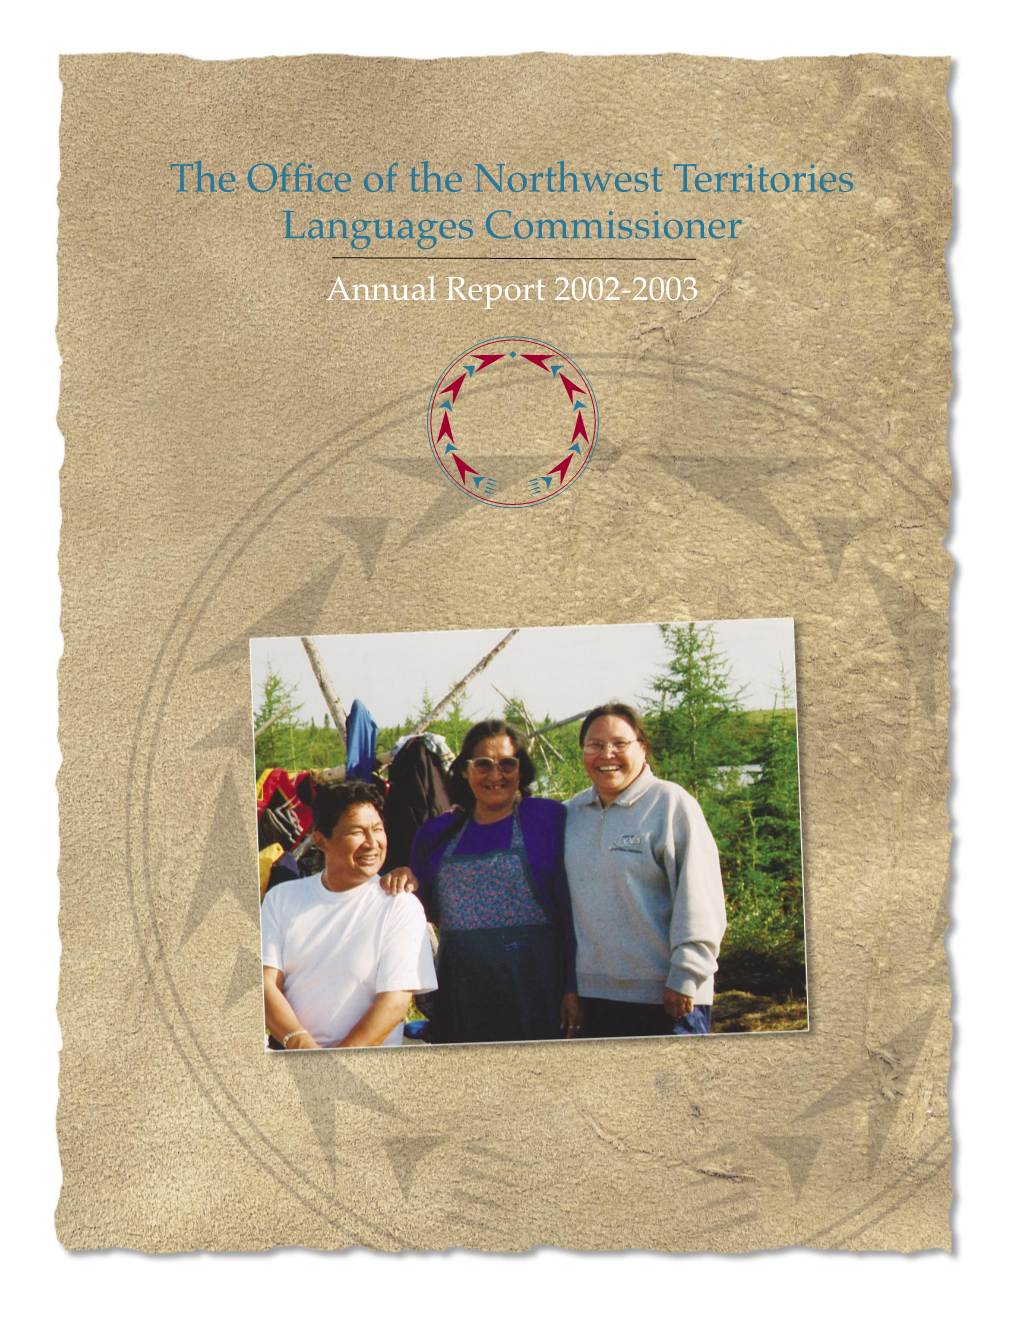 The Office of the Northwest Territories Languages Commissioner Annual Report 2002-2003 Table of Contents